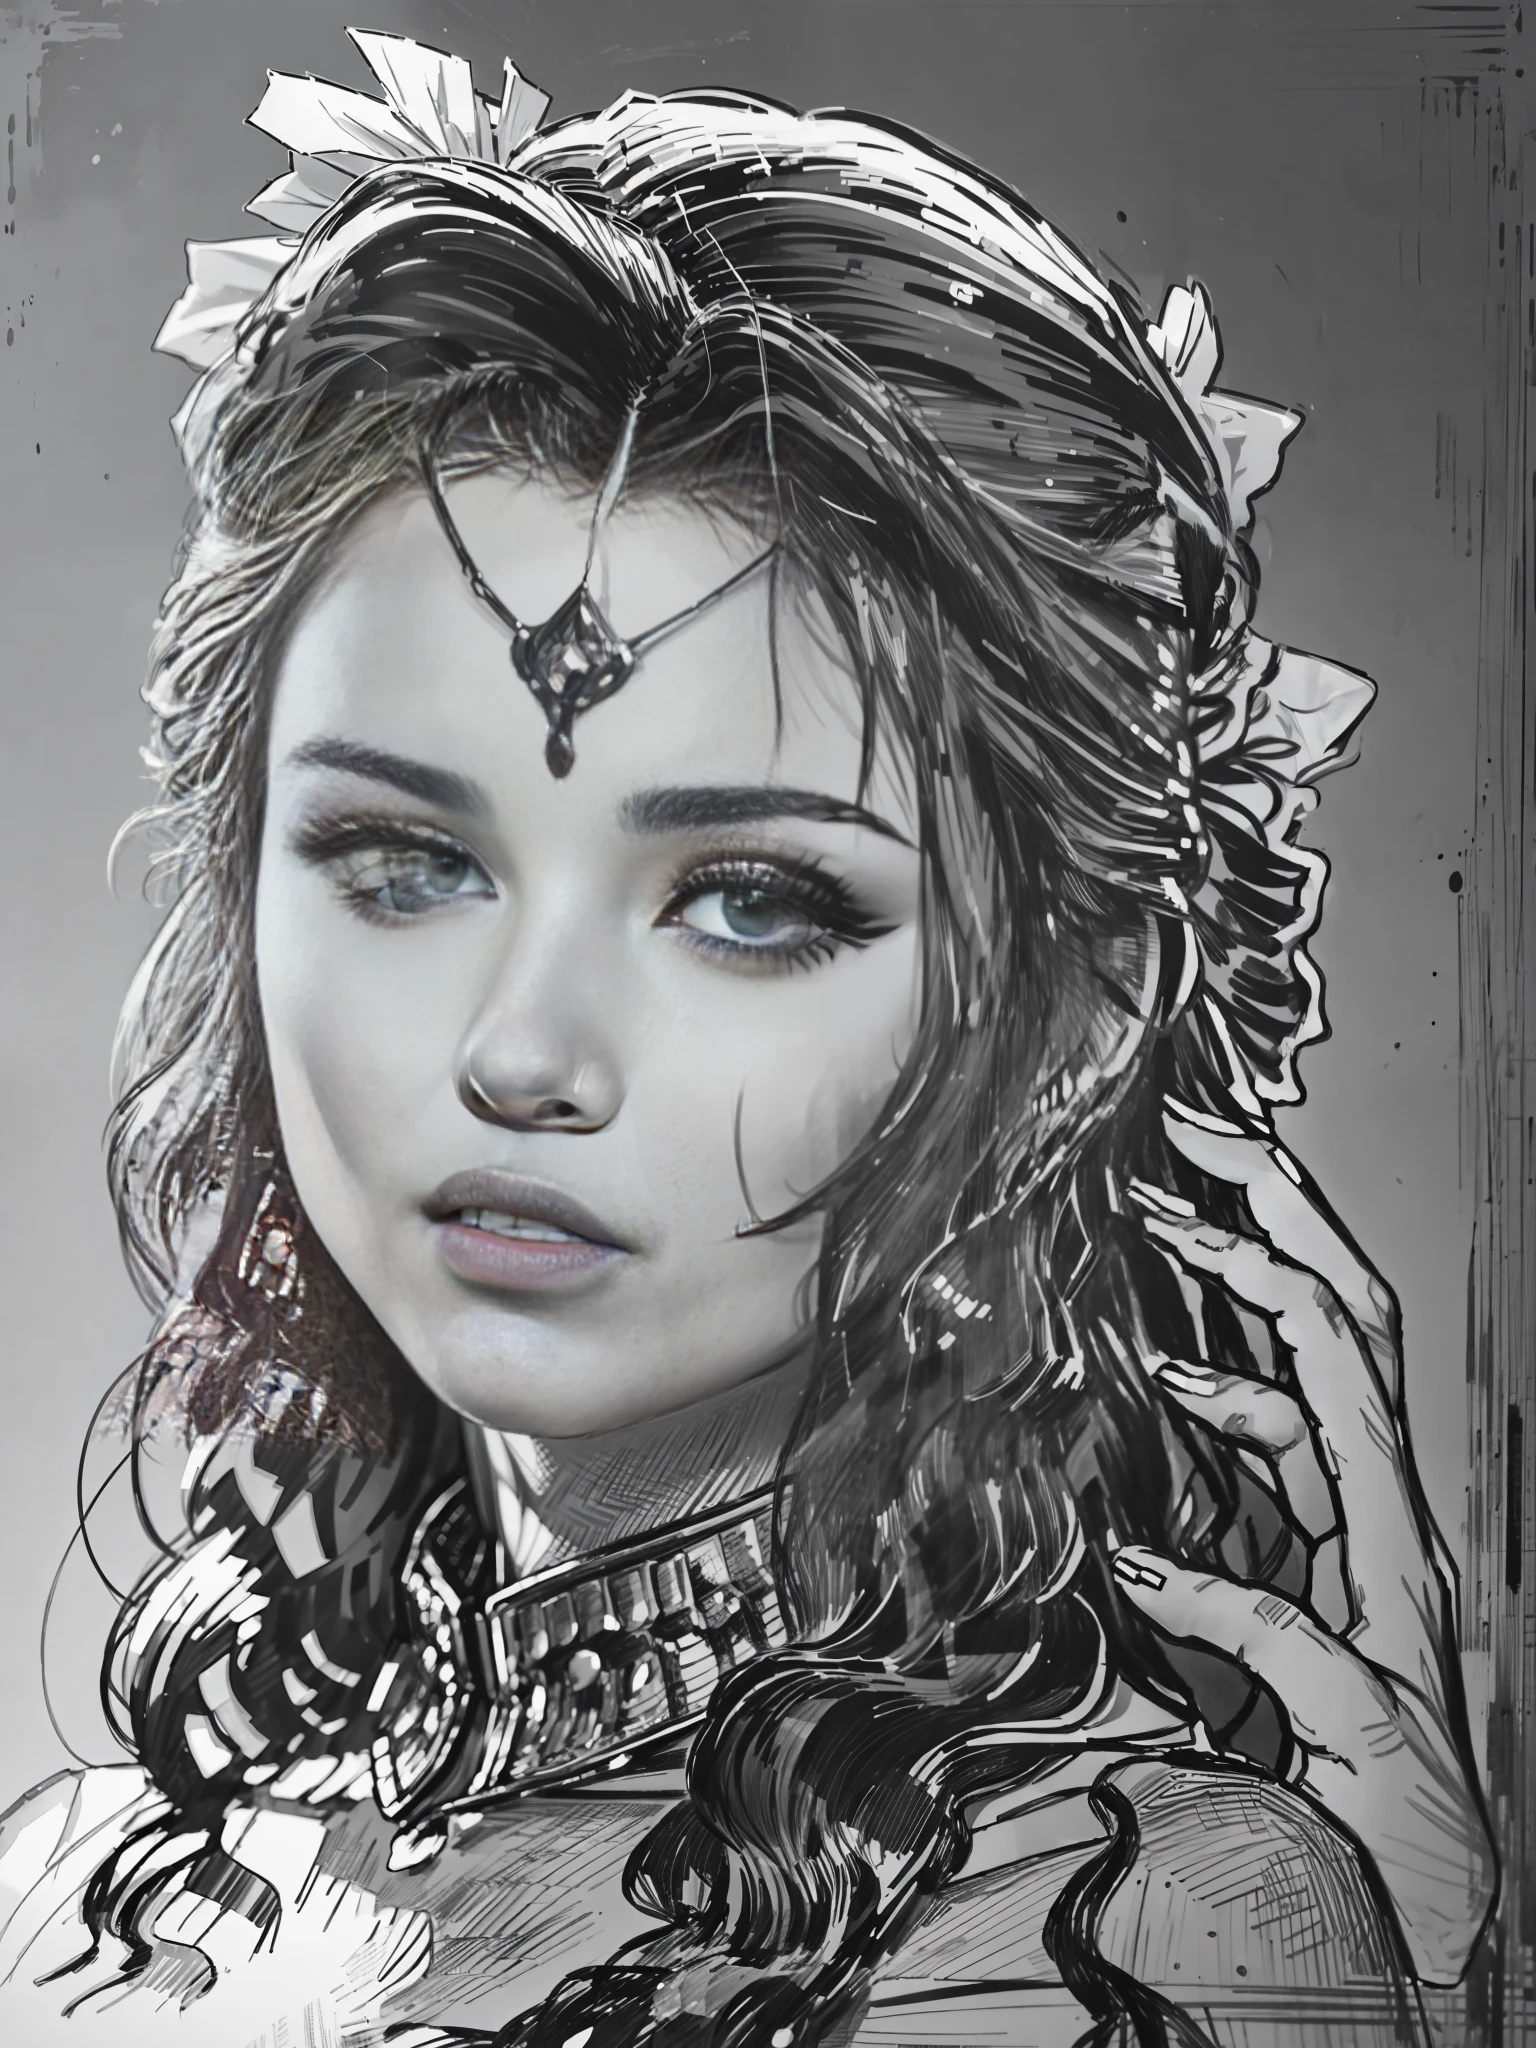 ((1 Norse warrior woman in realistic style)):1.5), Touch in pencil,intrigued eyes,Grayscale, intrigued details,super verbose,((graffiti drawing)):1.1), delicately painted by an experienced artist,White Balance,100mm lens,Grayscale